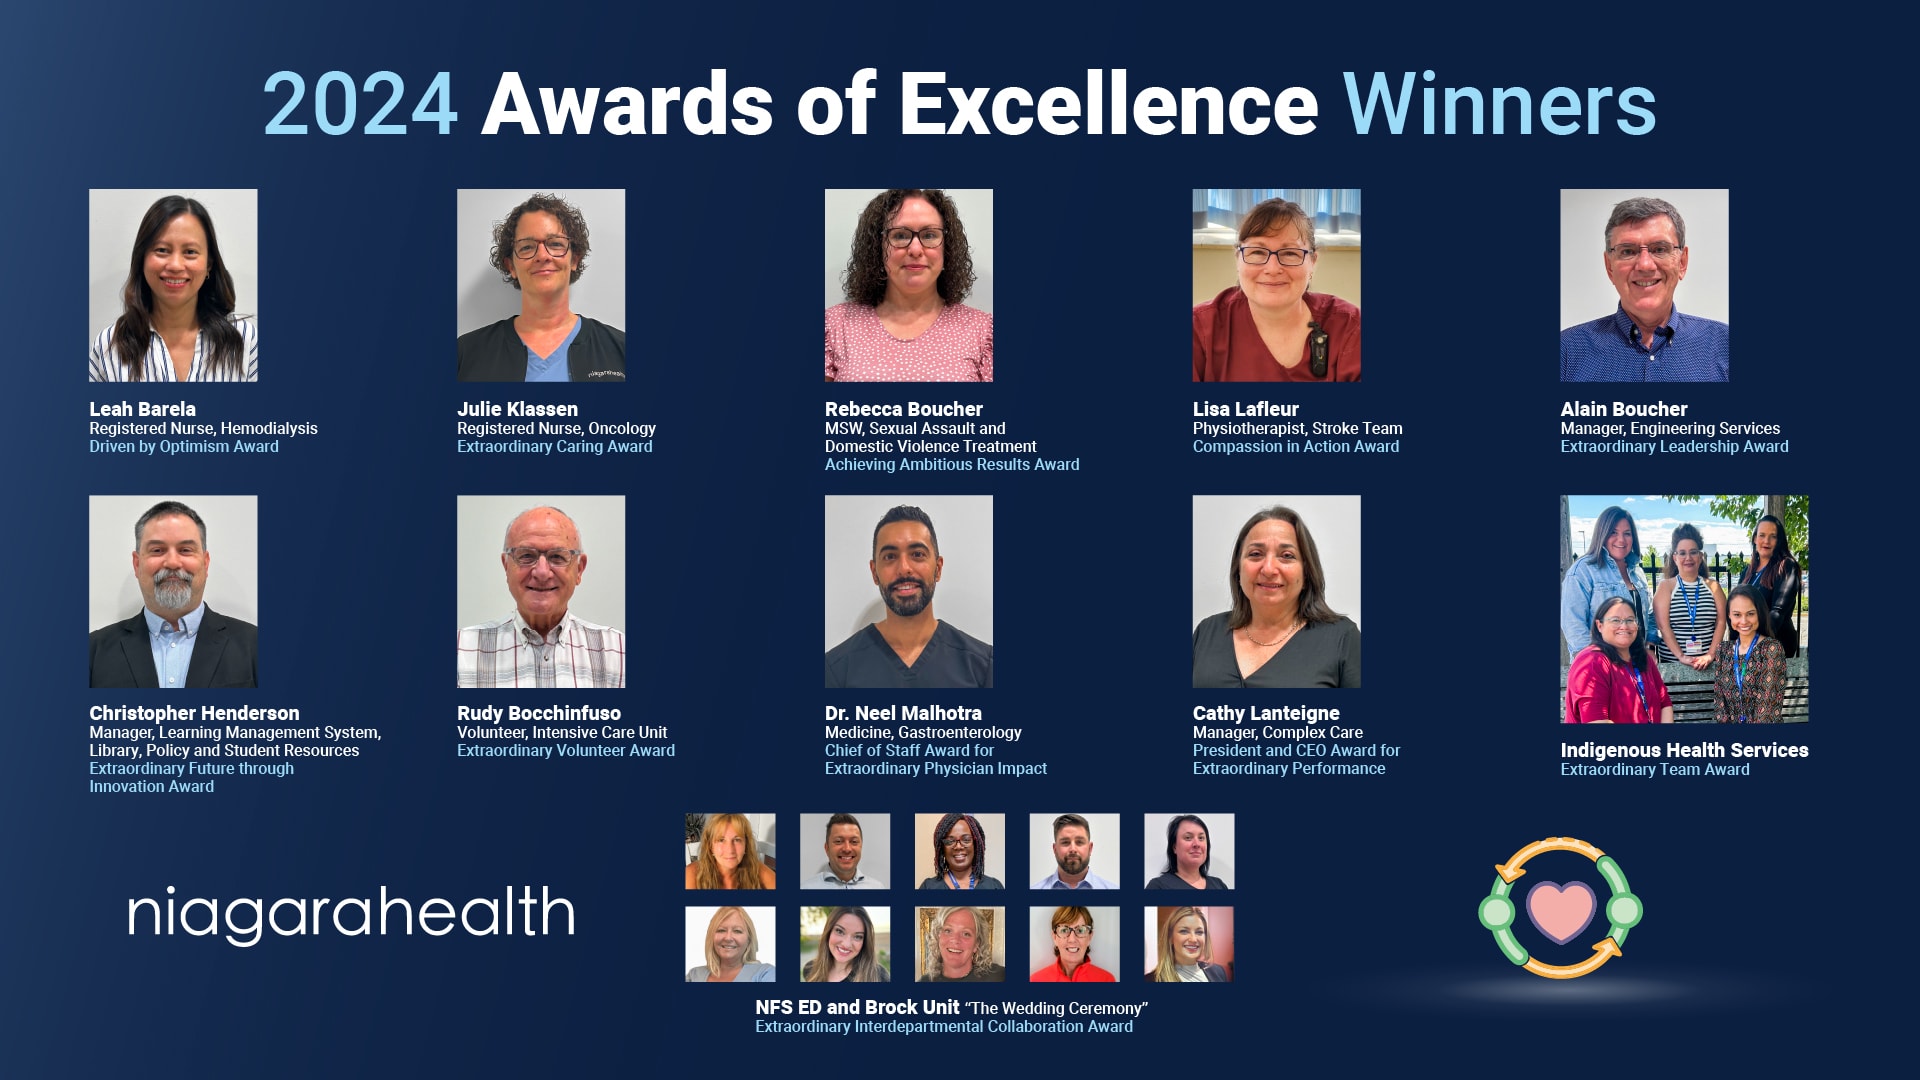 Awards of Excellence 2024 Winners